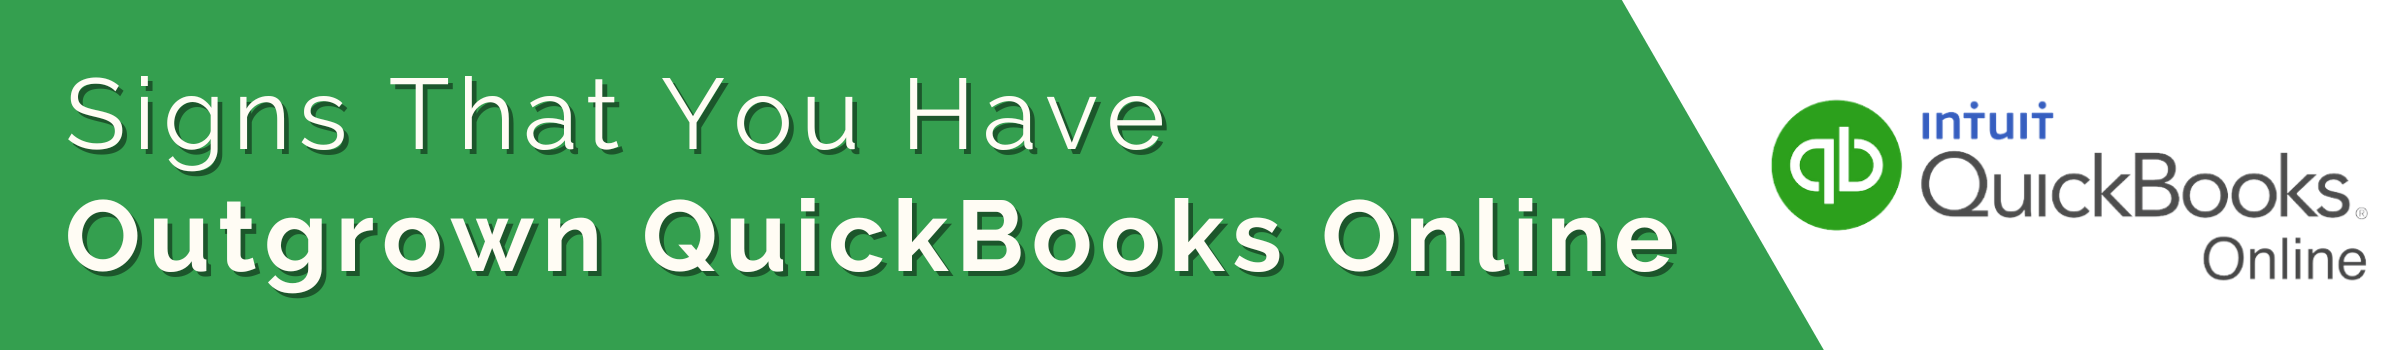 quicbooks-online-signs-grown